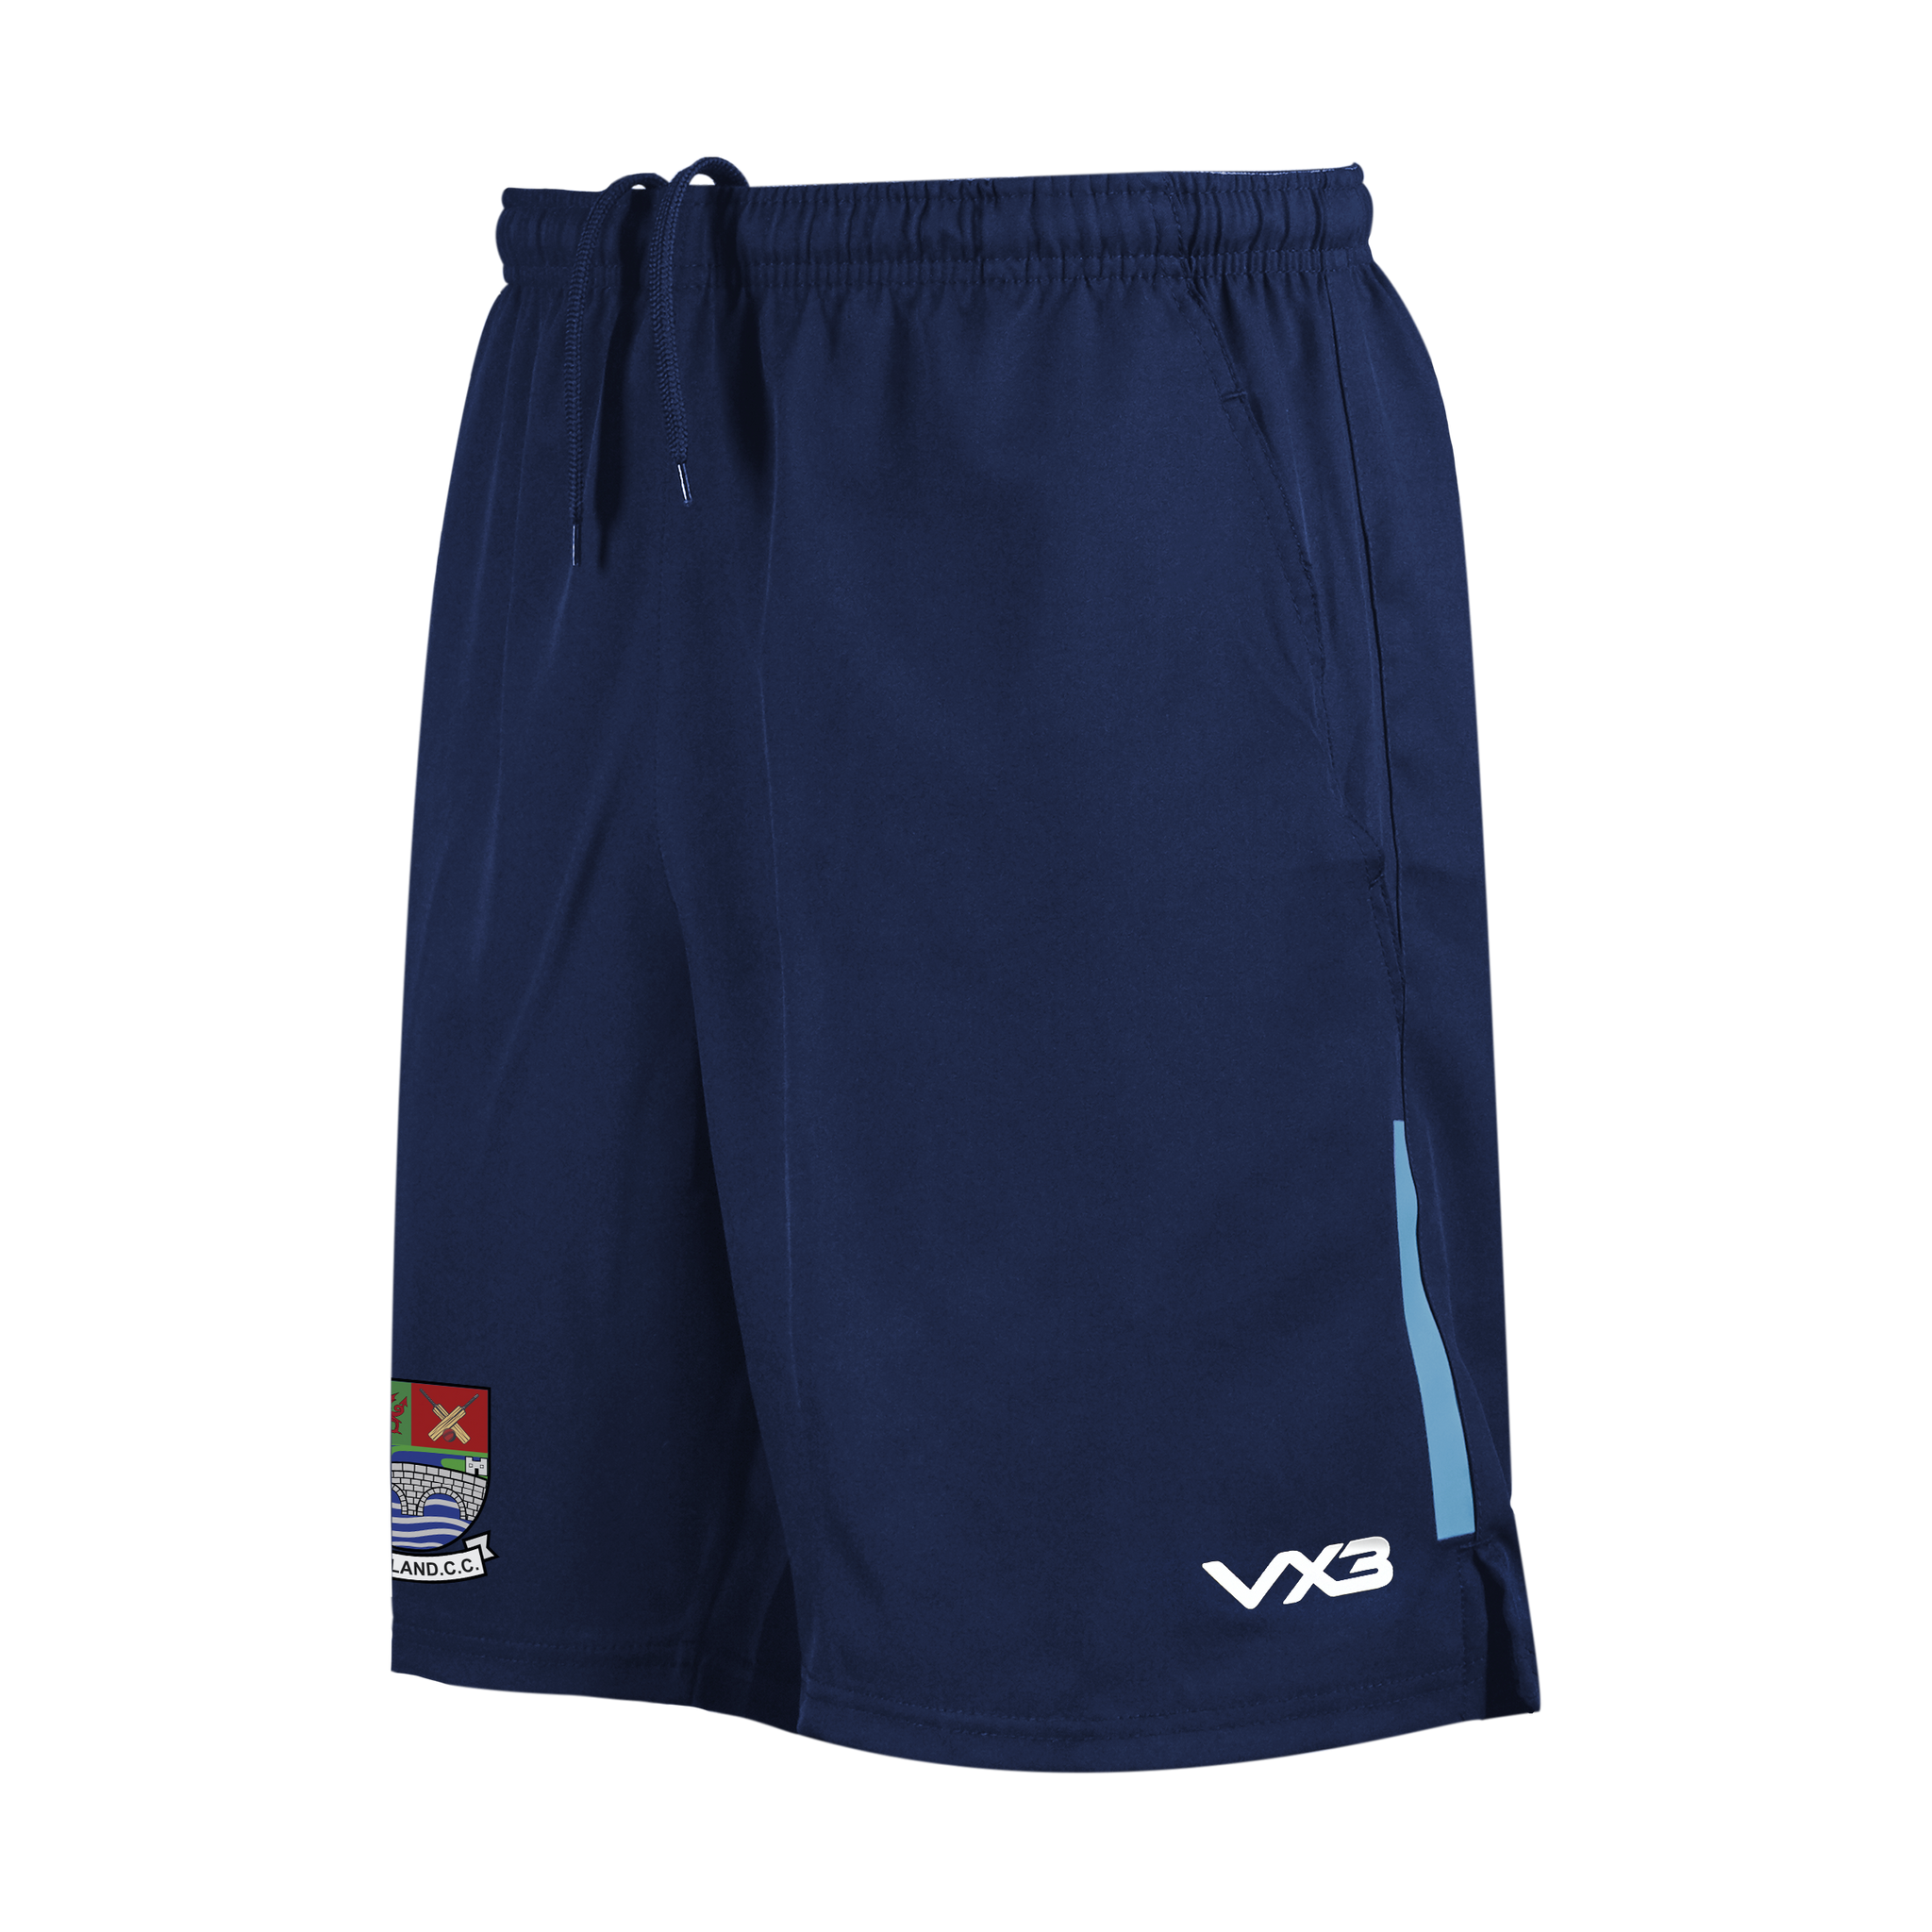 Whitland Cricket Club Fortis Travel Shorts